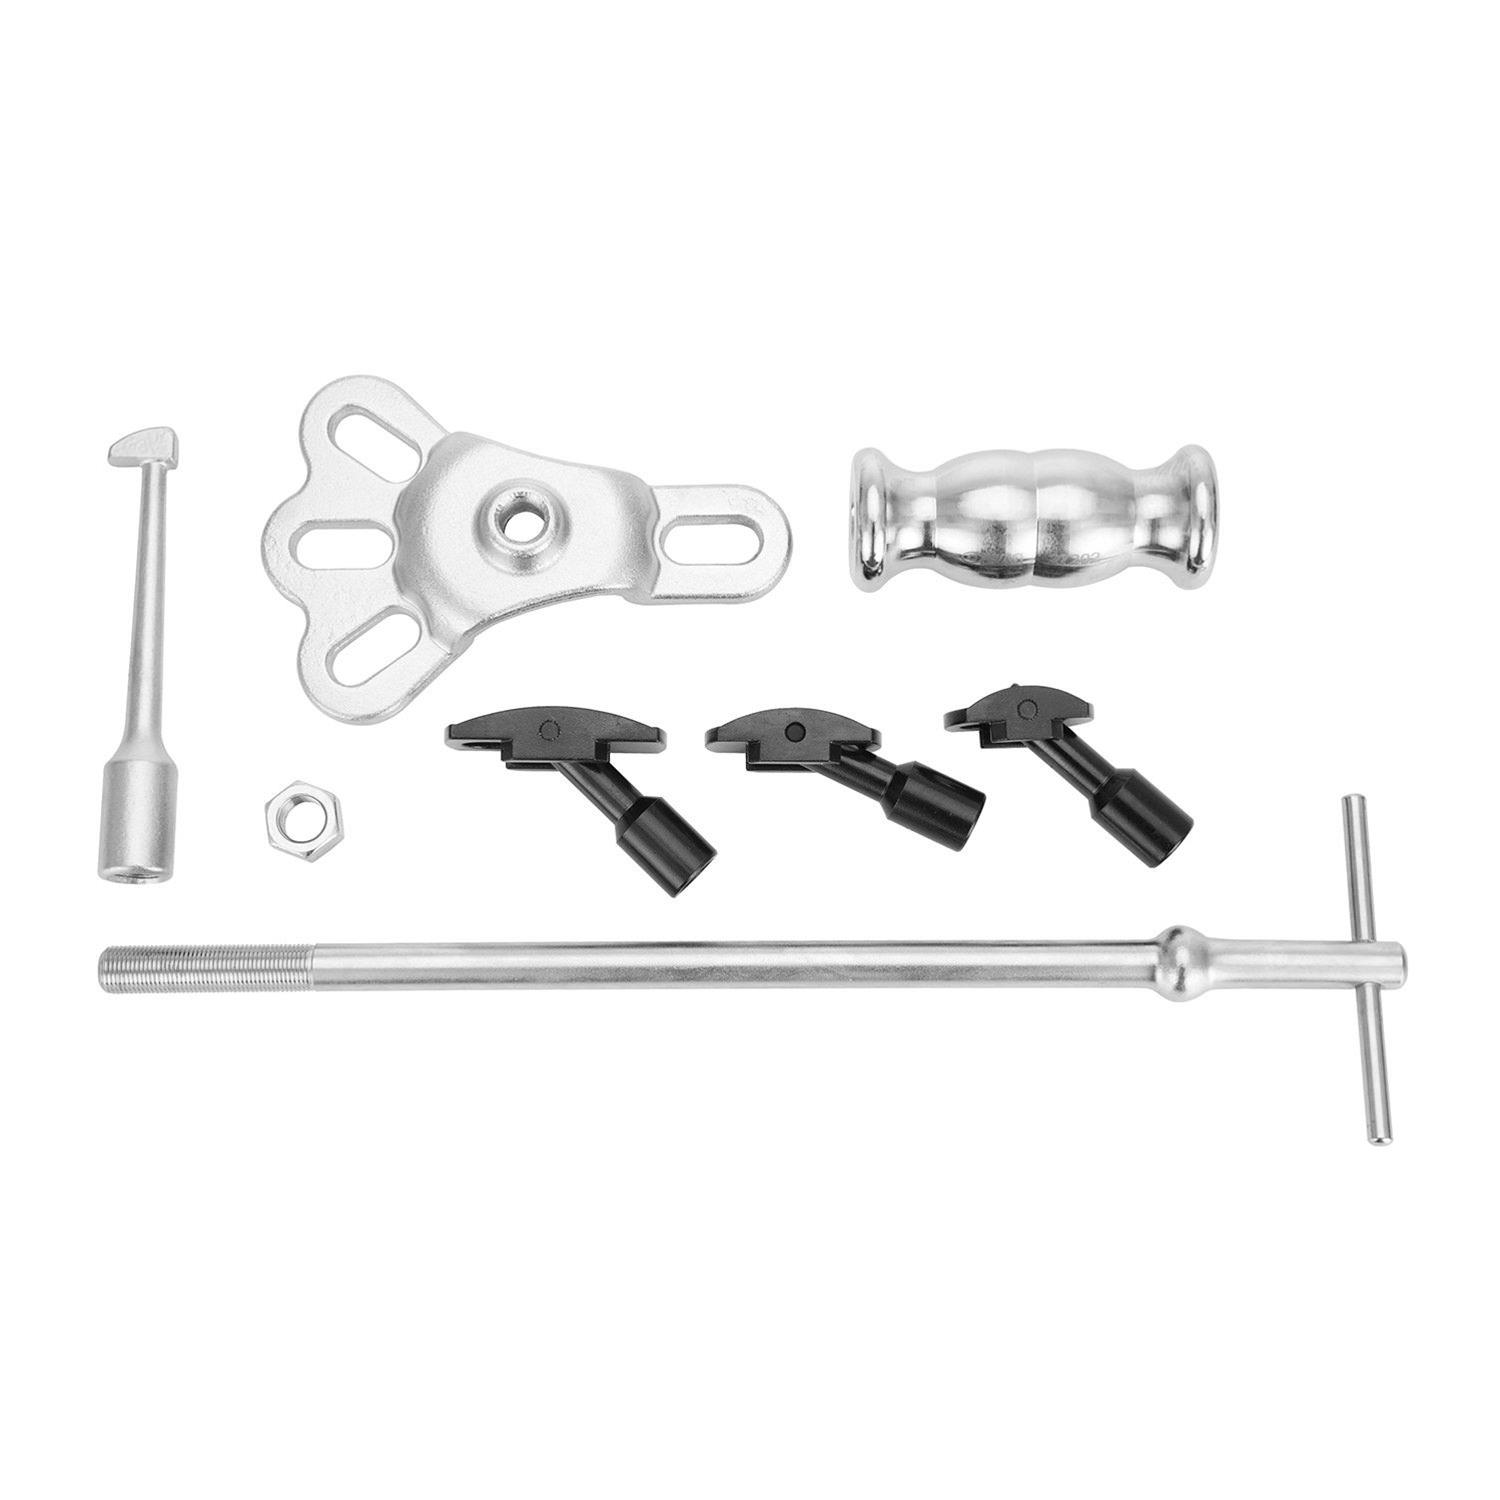 OEMTOOLS 27129  Rear Axle Bearing Remover Set 